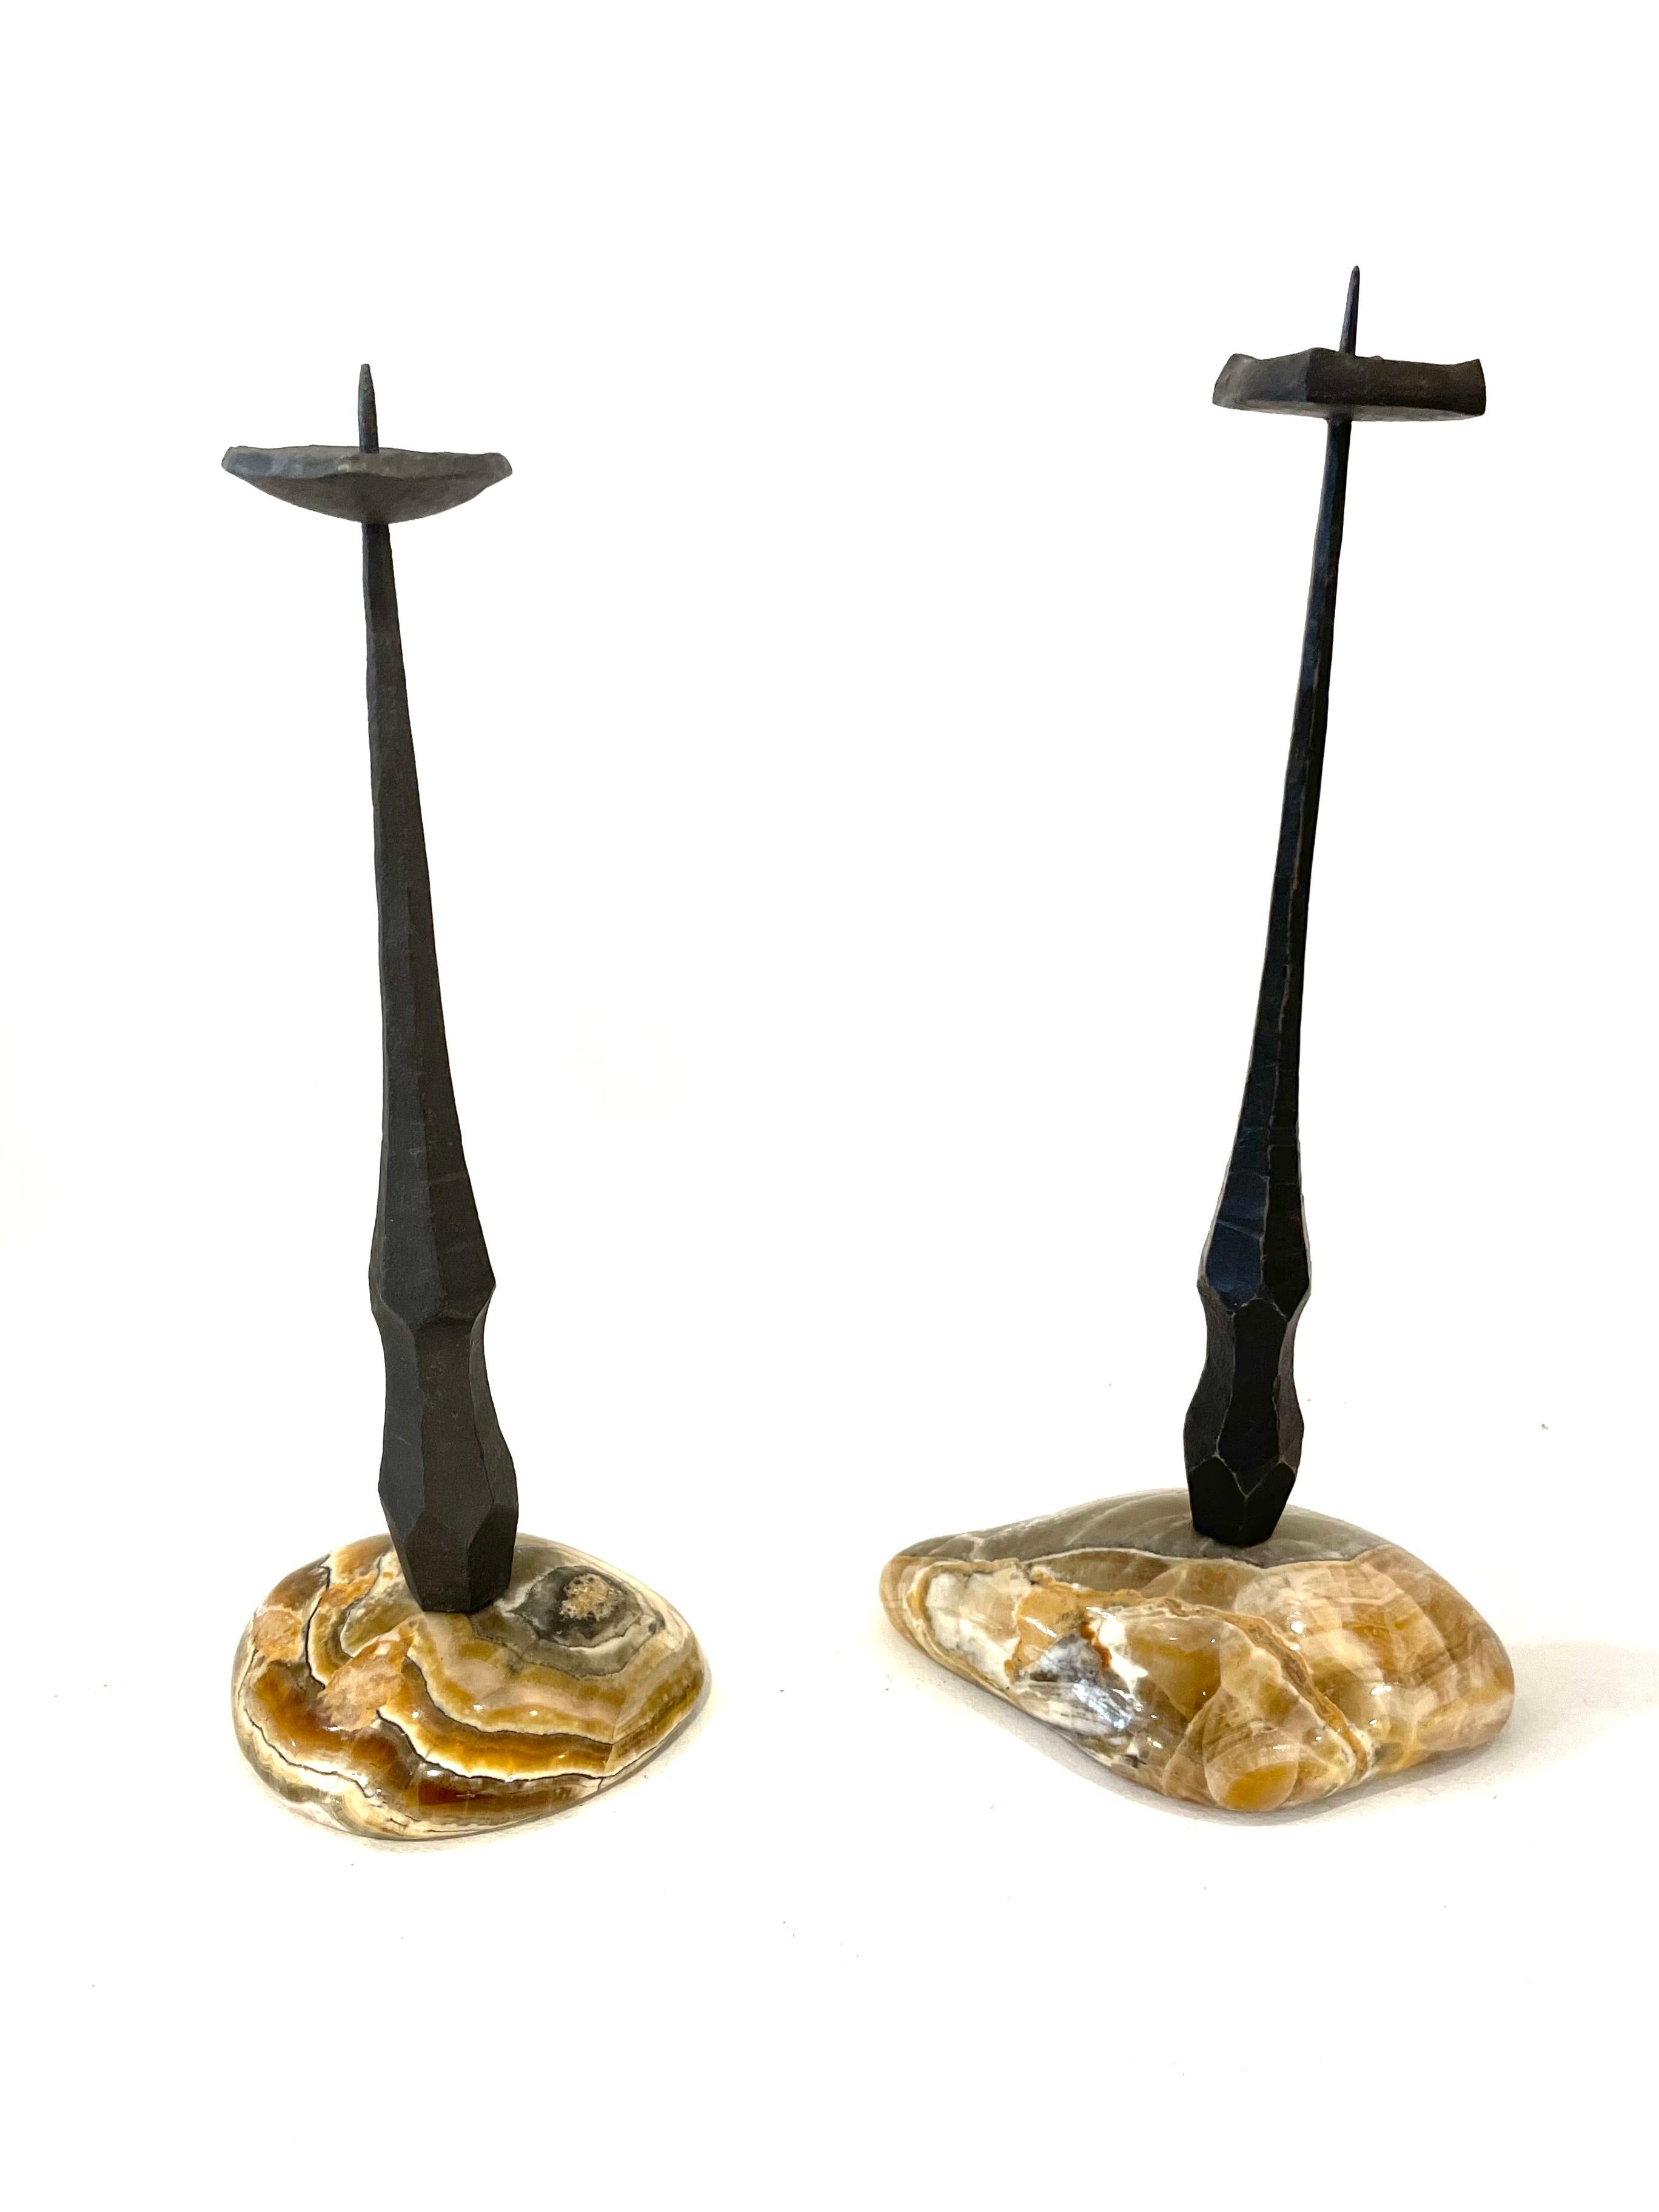 A pair of brutalist candlesticks crafted by the artist David Palombo. Made of iron rods, the two candlesticks slightly differ from one another, both have sharp-pointed ends and are supported on lovely marble bases. 

David Palombo (1920-1966) was